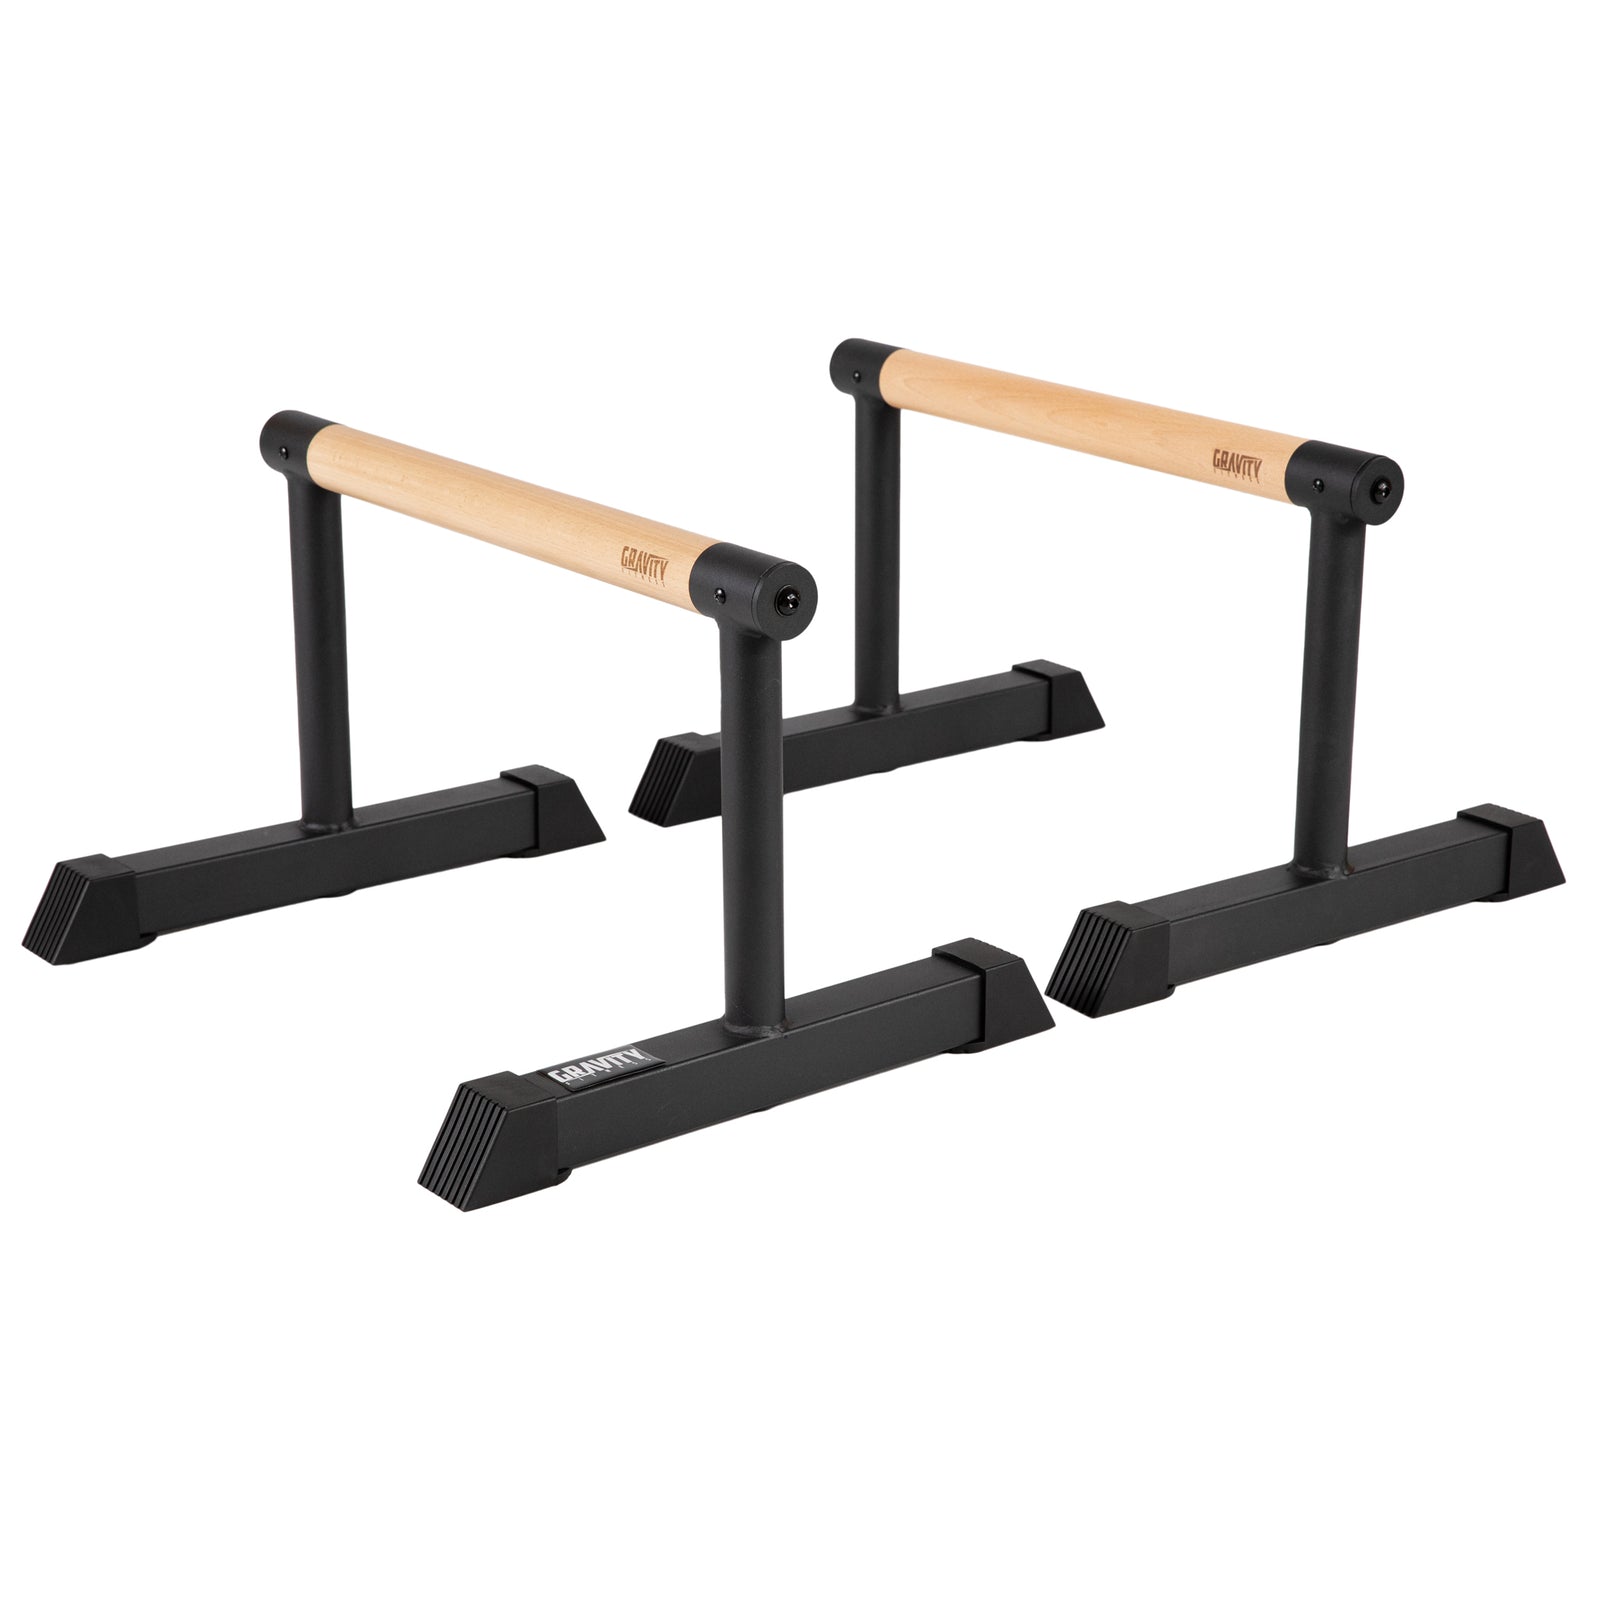 FIRE FITNESS Parallettes Bars for Dip Bars Stand, Pull-Ups stand